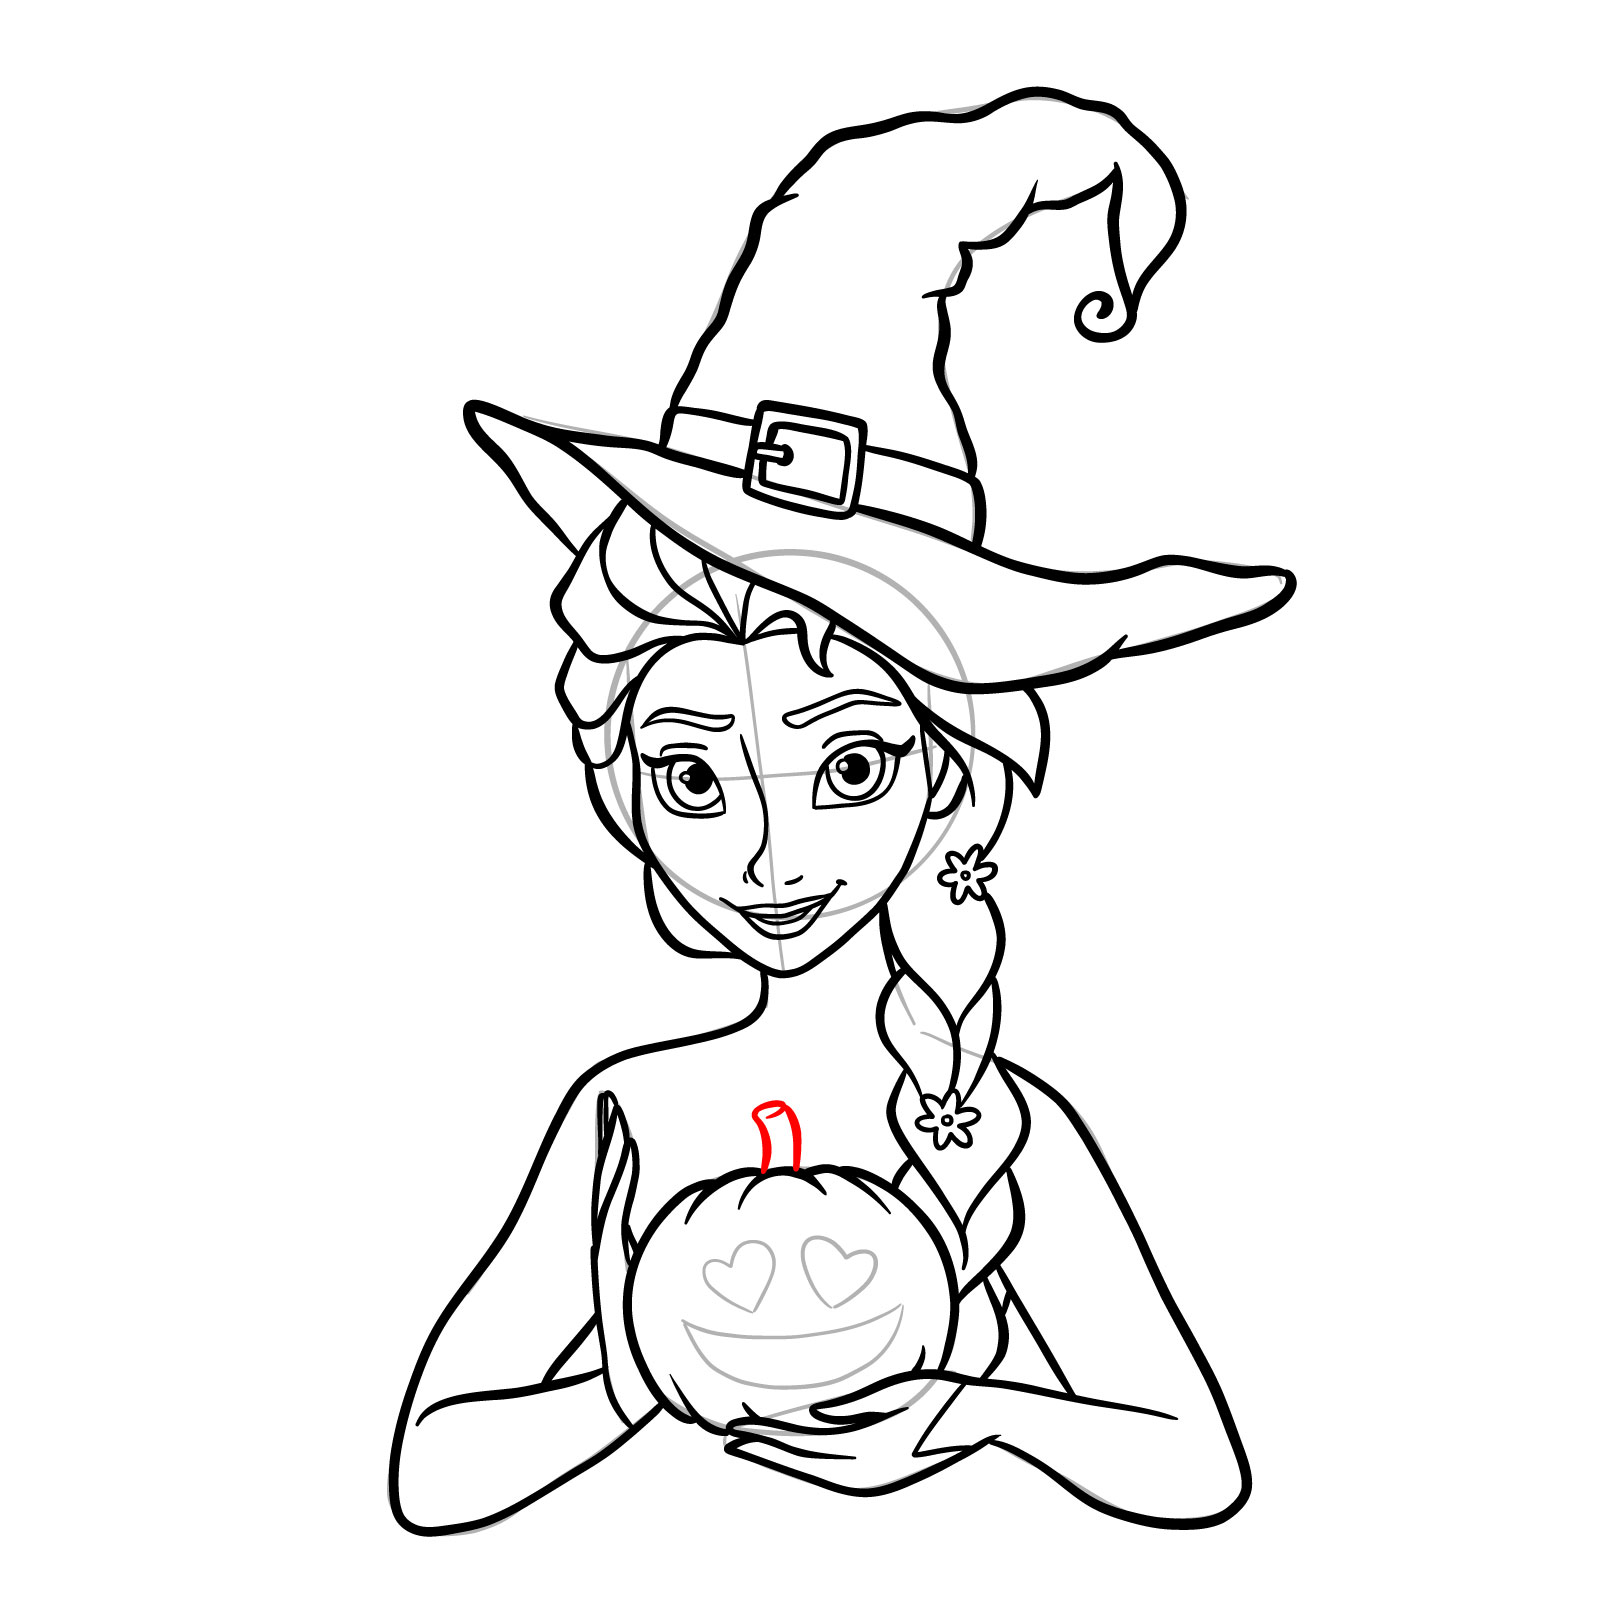 How to Draw Witch Elsa on Halloween - step 29